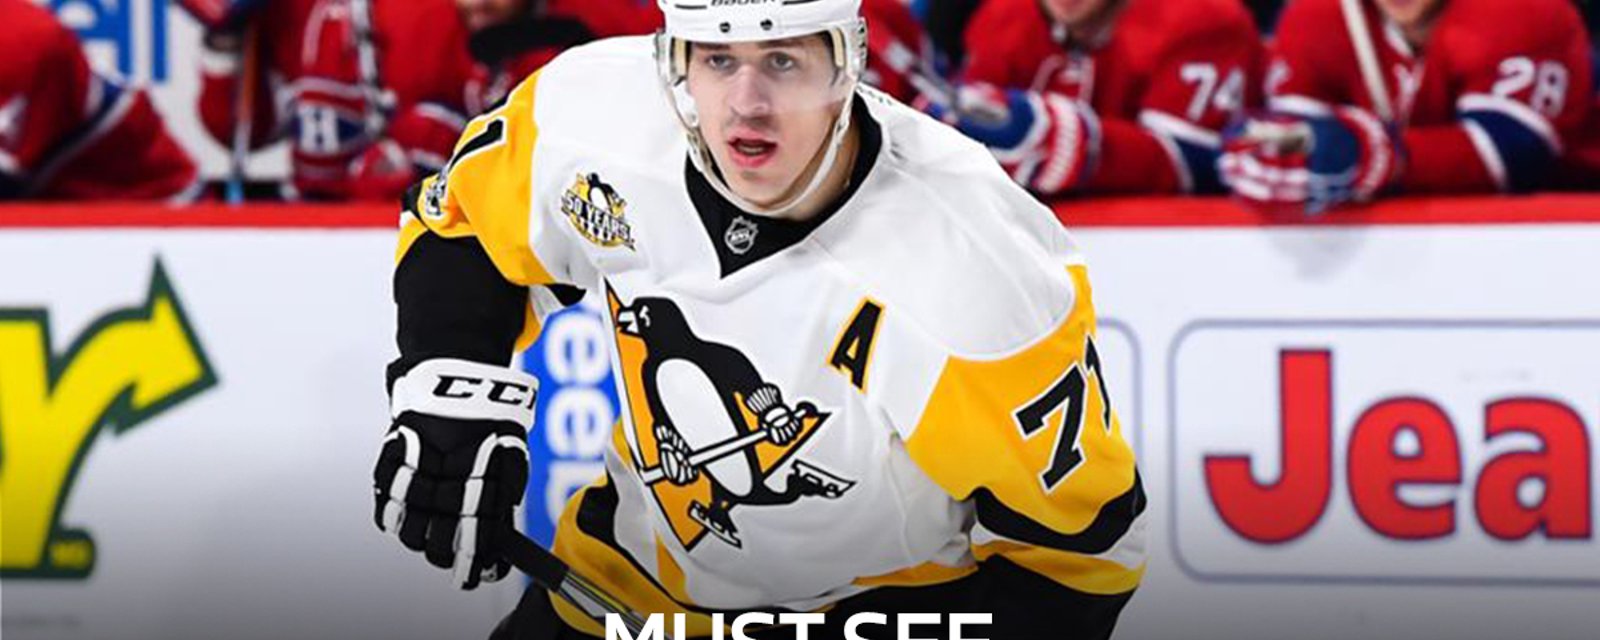 Must see: Malkin keeps the Penguins in the game with a perfect snipe!